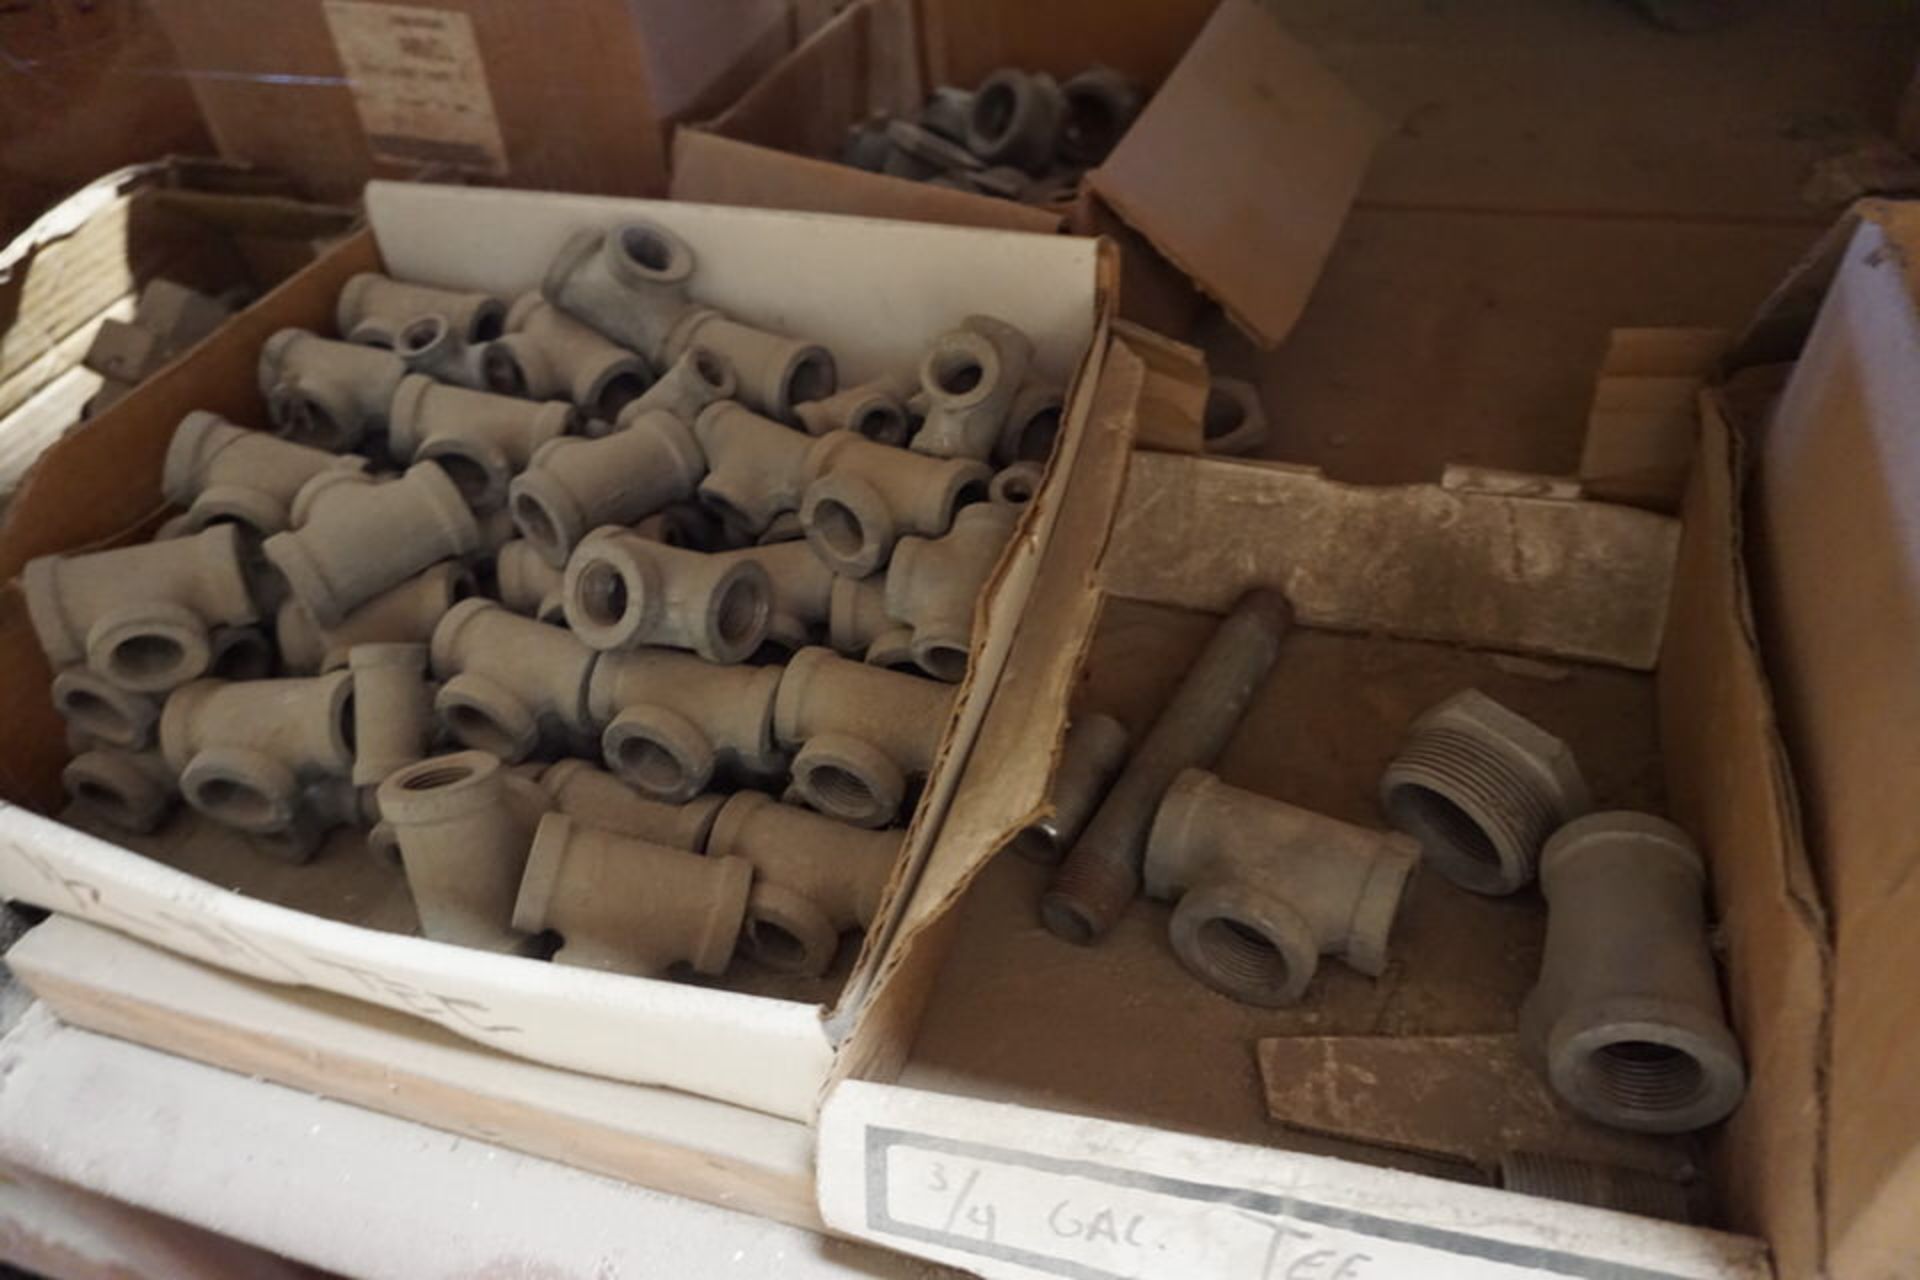 CONT OF SHELF: ASSORT SIZE PIPE NIPPLES, L'S, BELL RODS, REDUCERS, RANGE 1/8" TO 3" APPROX 400 PCS - Image 15 of 16